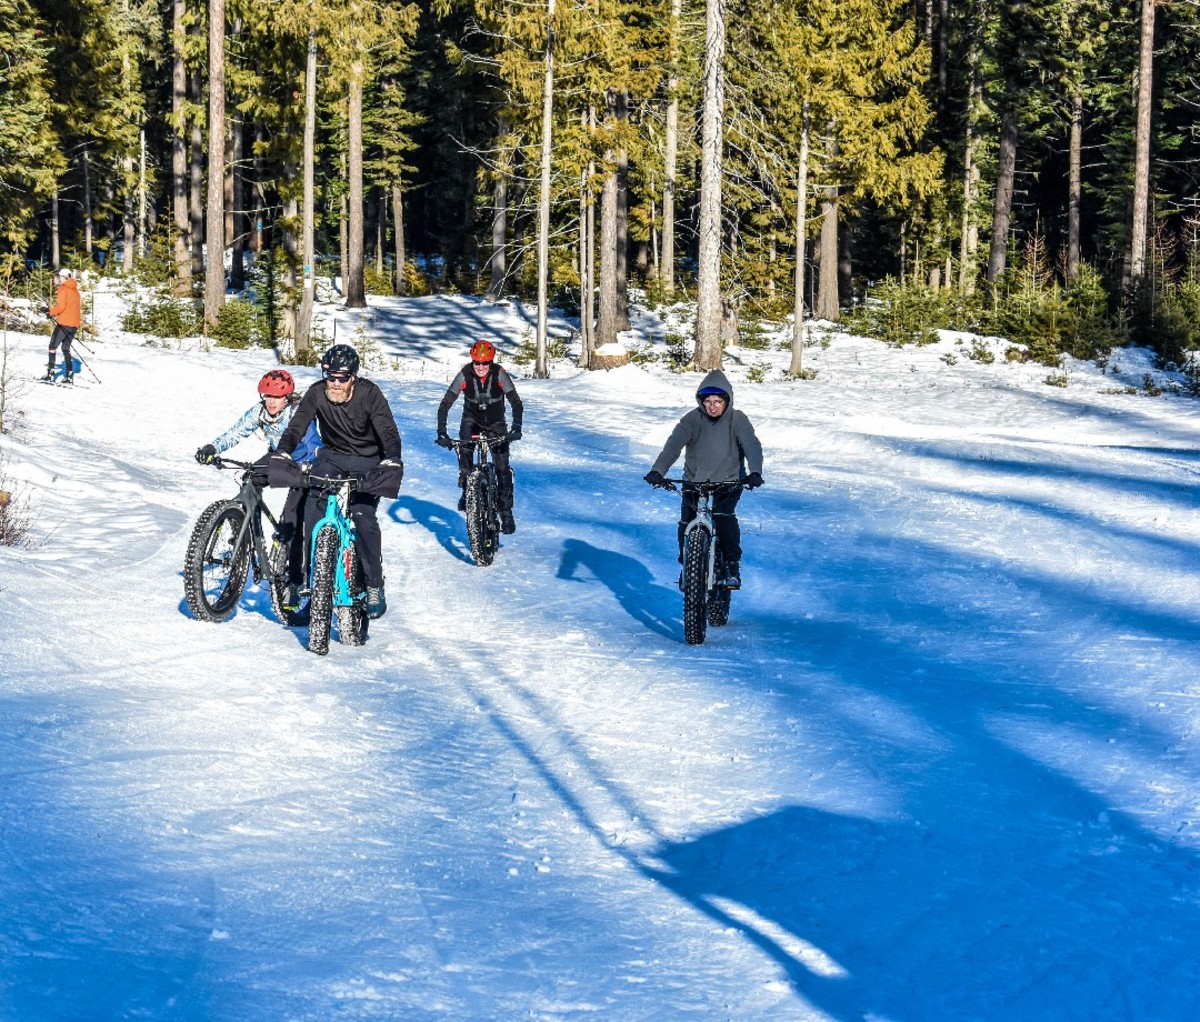 Family on fat bikes on a snowy, pine-forested trail in northwestern Washington.